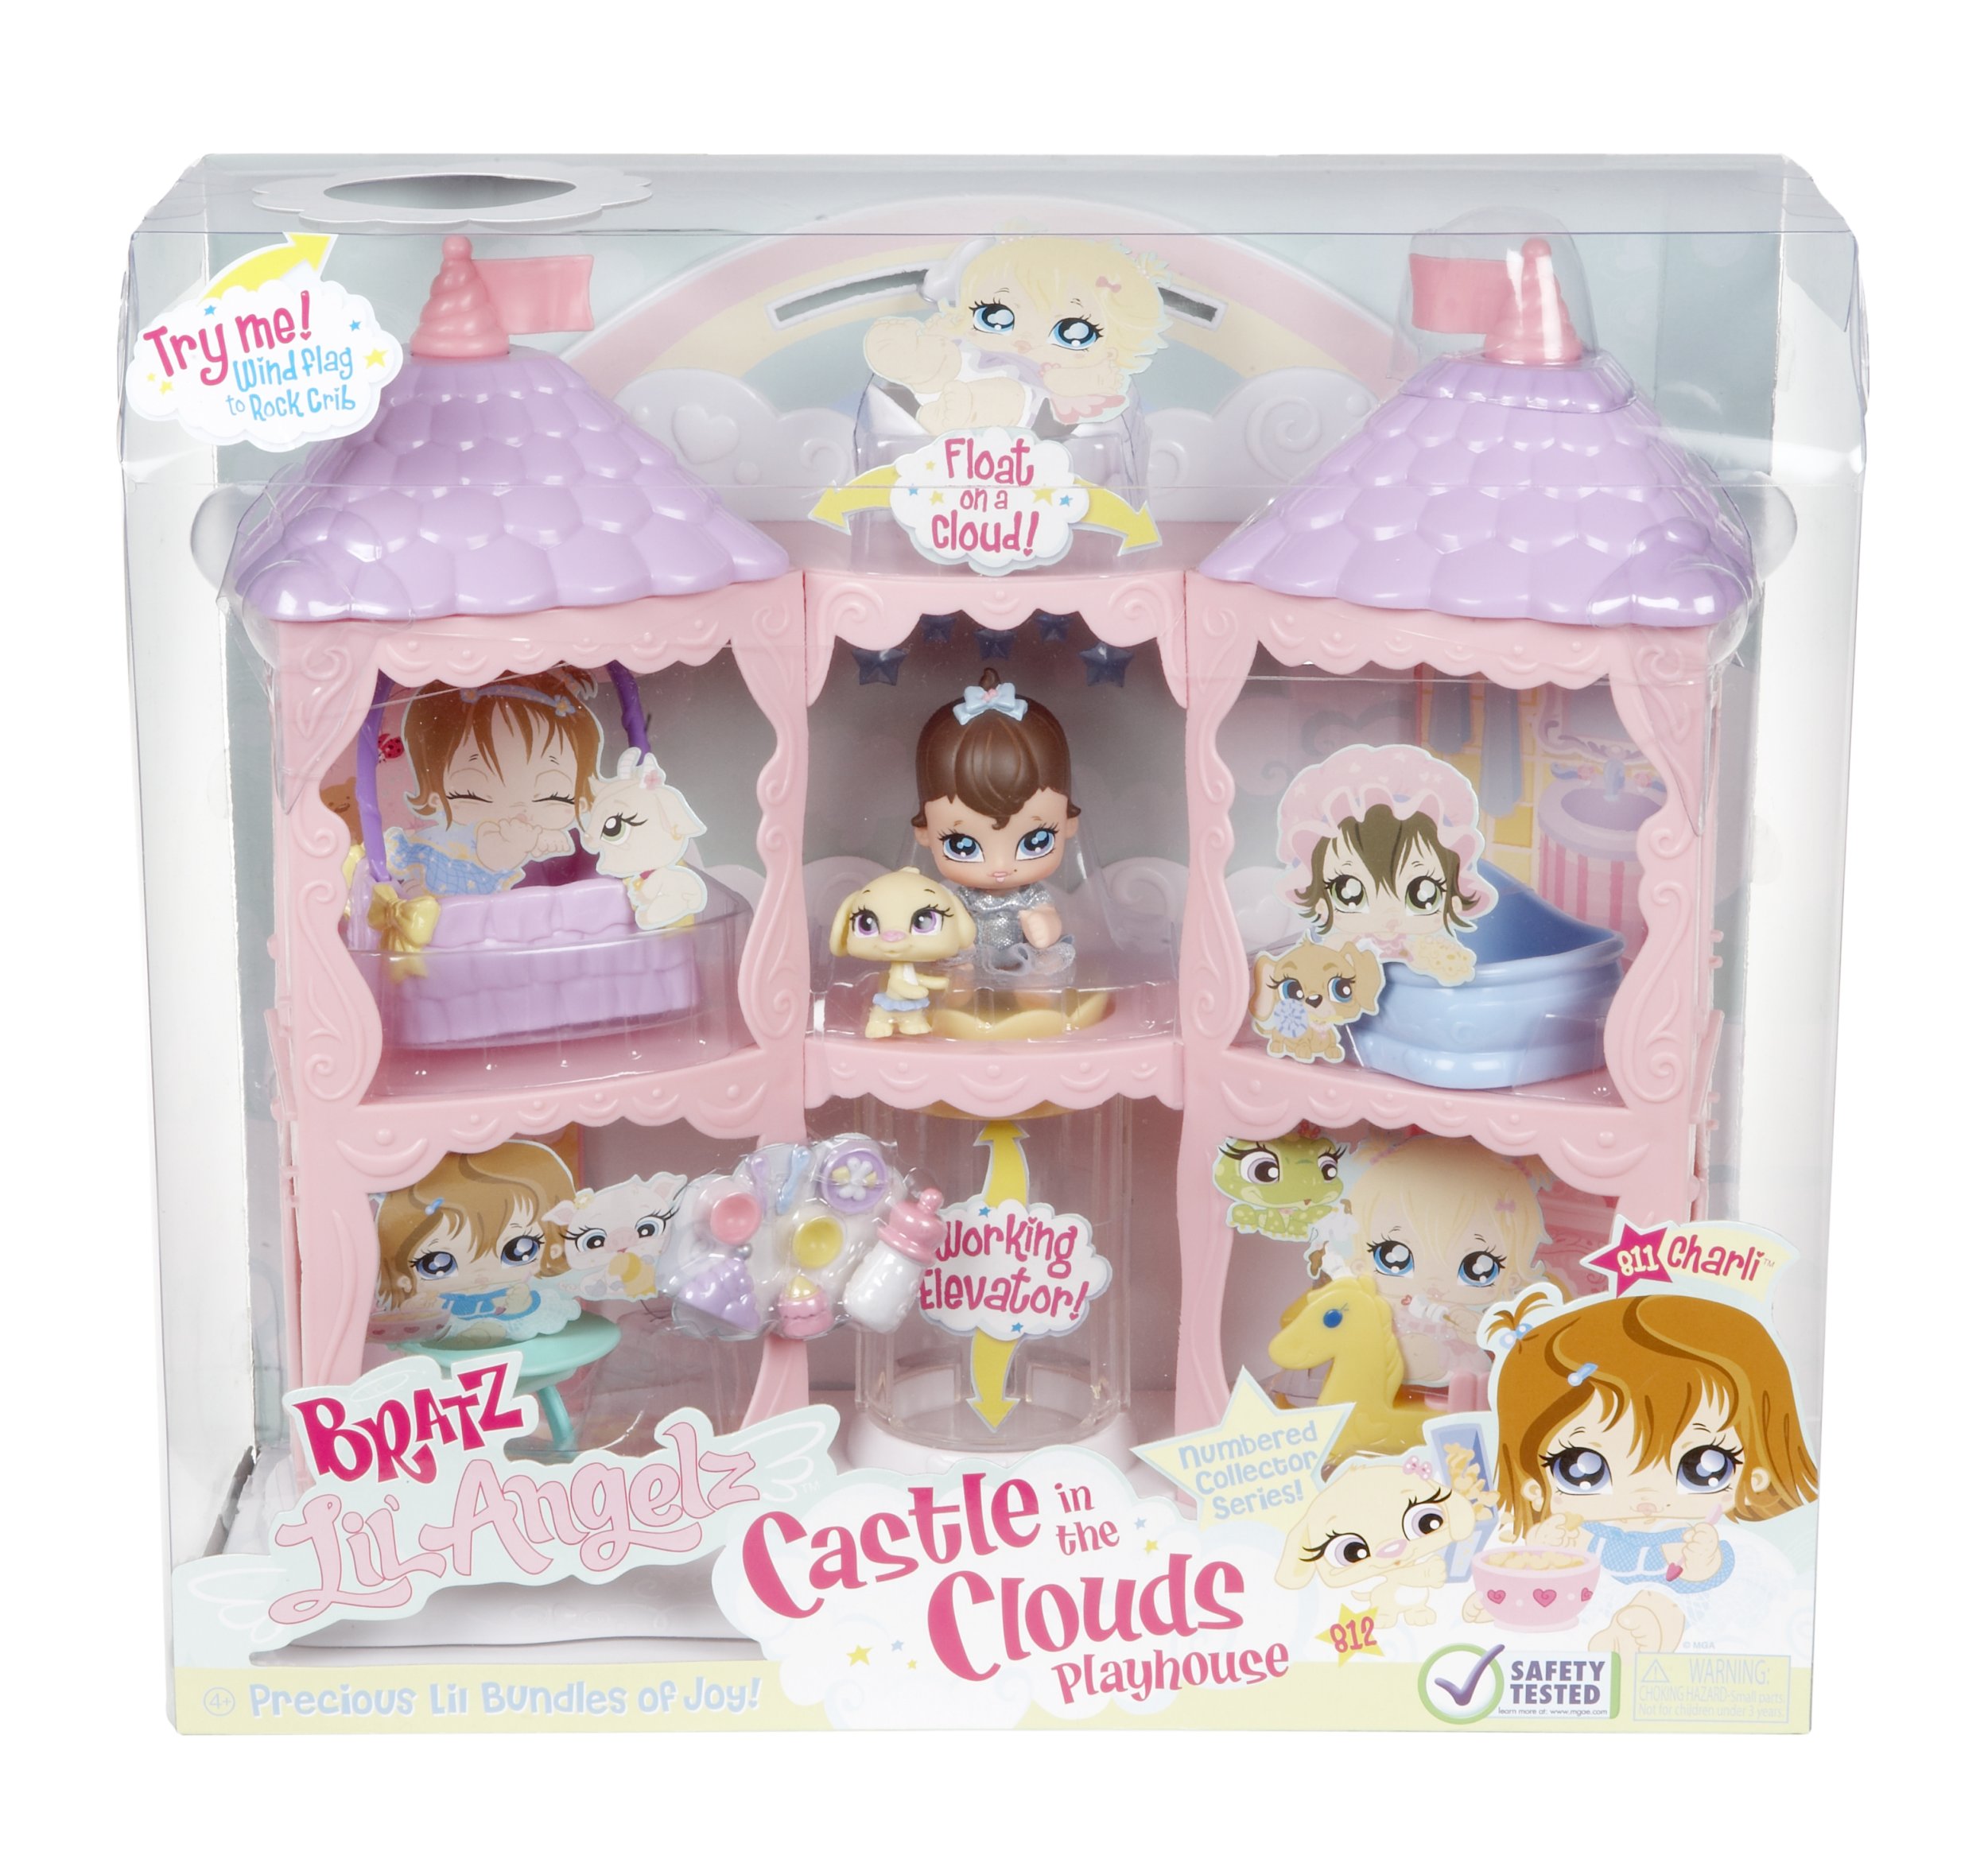 Bratz Lil Angelz Castle in The Clouds Play Set